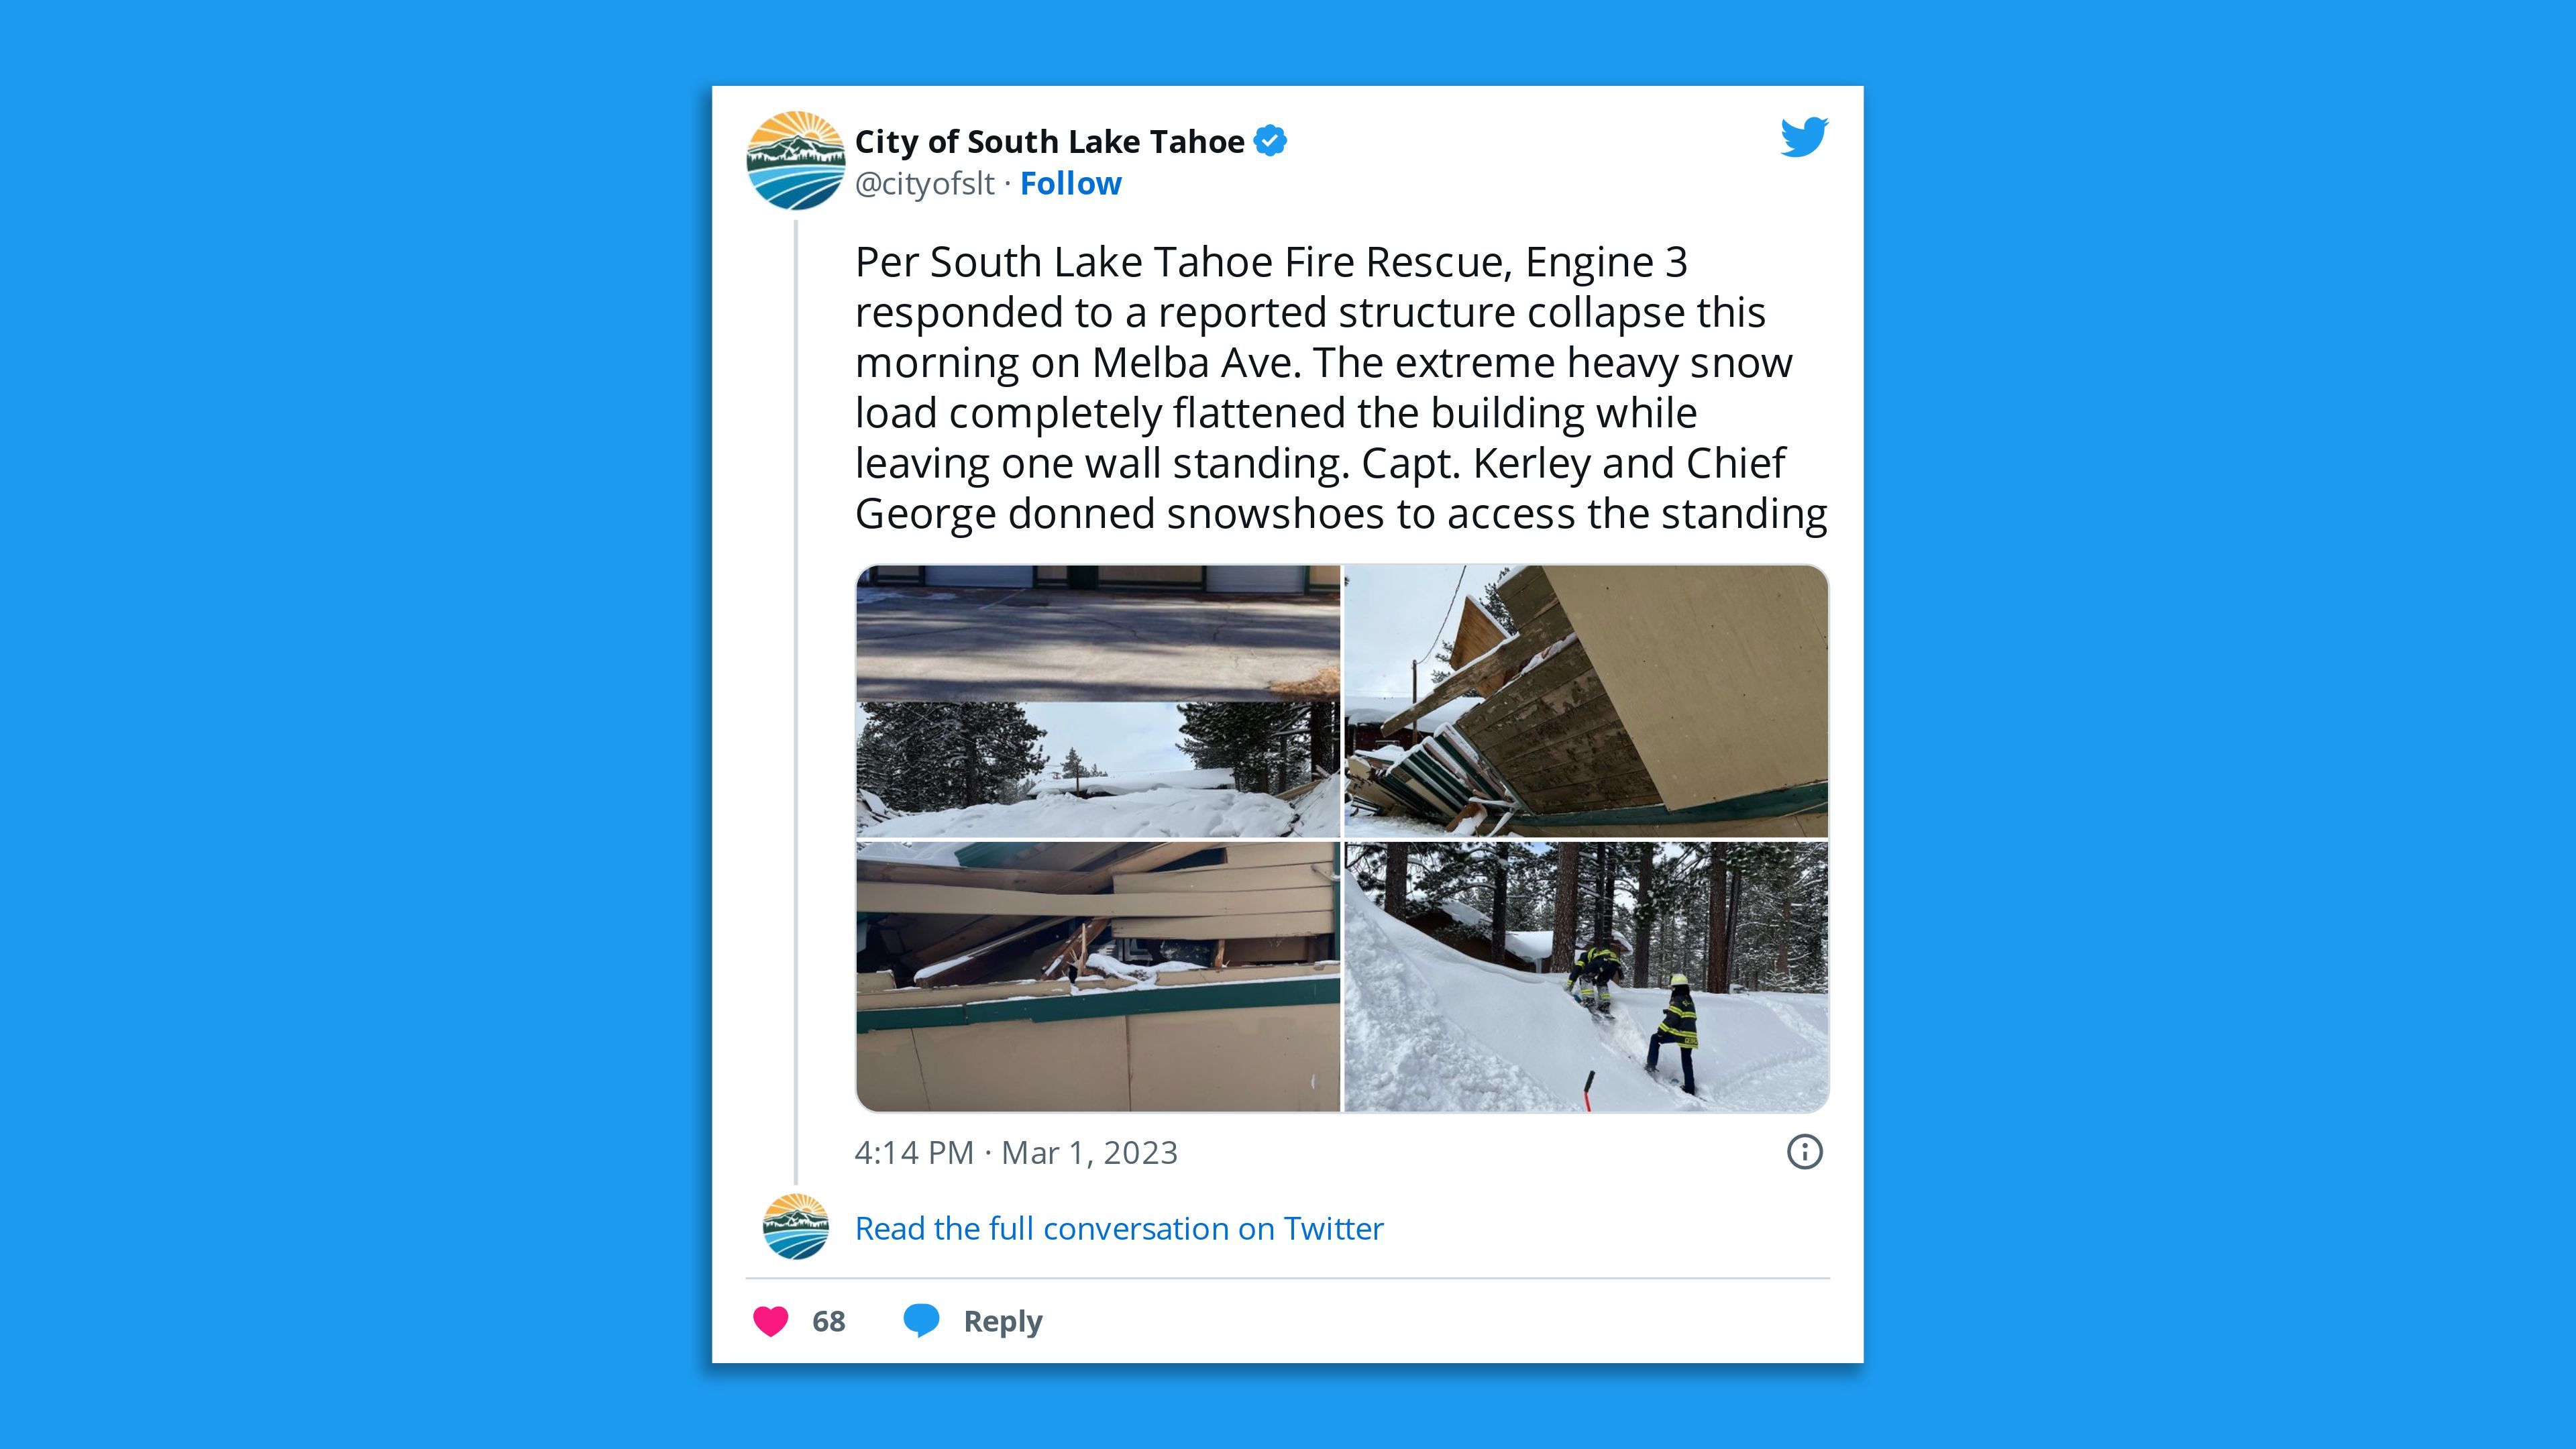 A City of Lake Tahoe tweet Wednesday stating: "Per South Lake Tahoe Fire Rescue, Engine 3 responded to a reported structure collapse this morning on Melba Ave. The extreme heavy snow load completely flattened the building while leaving one wall standing."